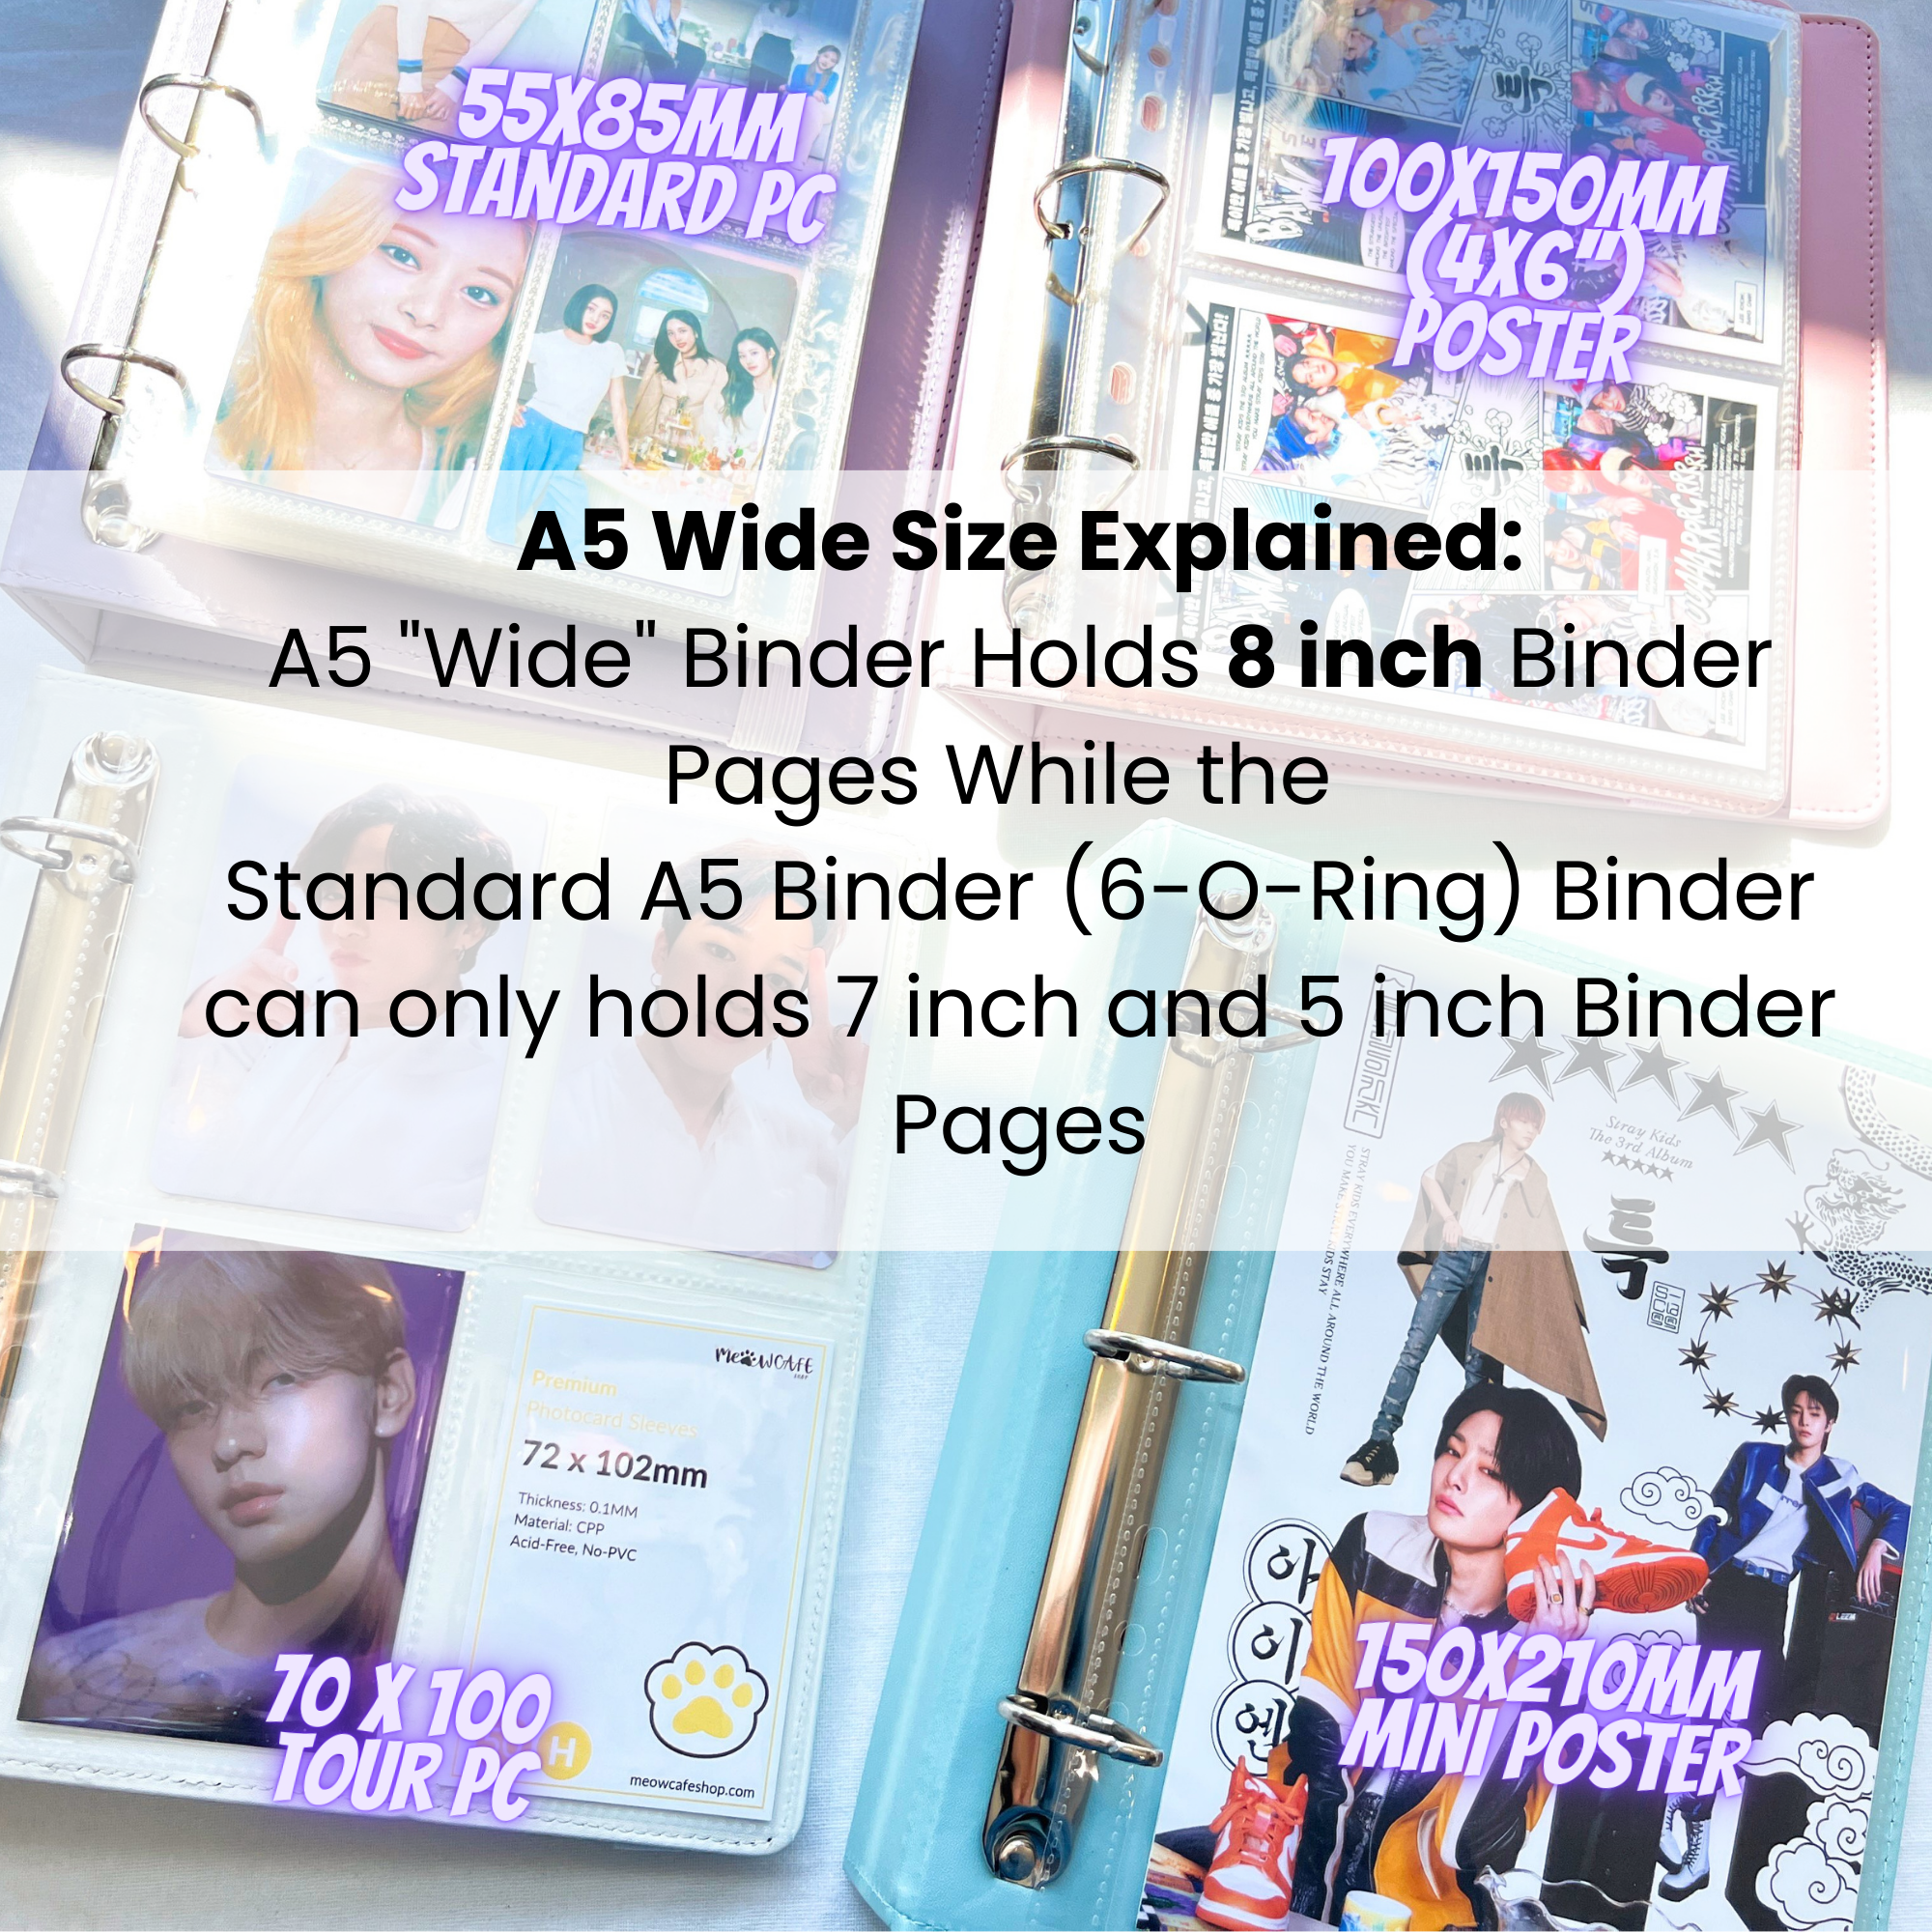 K-KEEP [A5 Wide] Binder [Pastel Series] "Tour" "Postcard" Binder | 1 inch  Pastel Leather Collection Kpop Photocard Binder 4x6 Postcard Toploader  6 x 8 inch Stray Kids Mini Poster